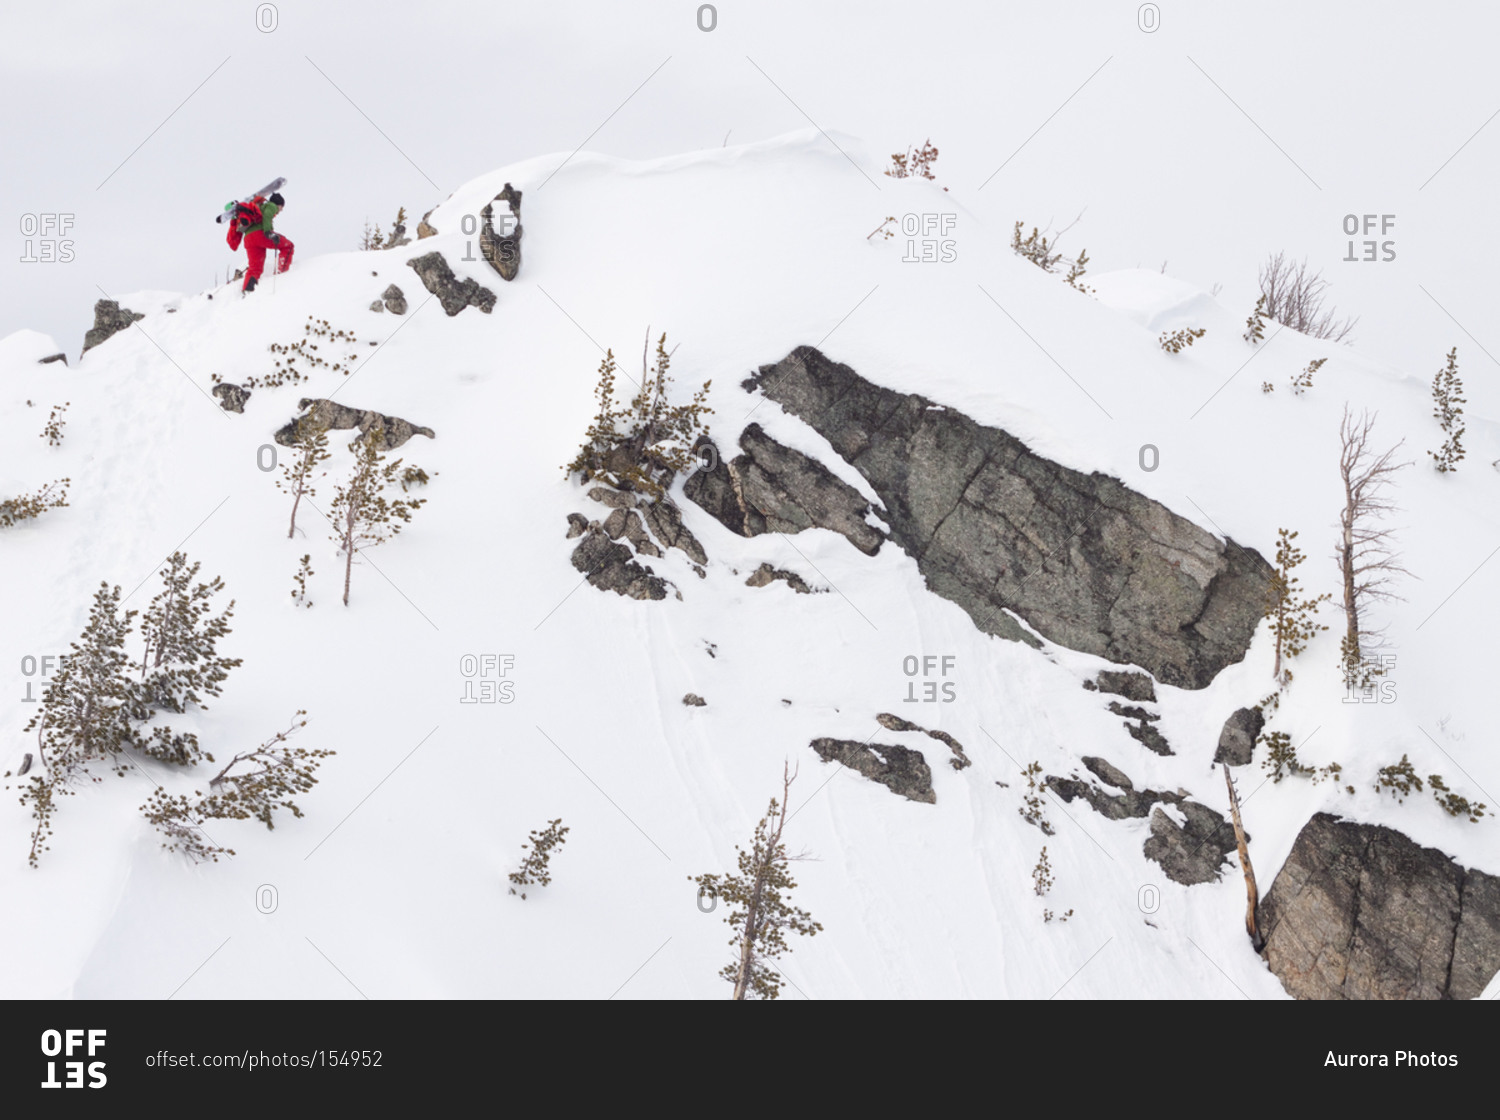 A male backcountry skier boot packs up a ridge to ski in the Beehive Basin near Big Sky, Montana